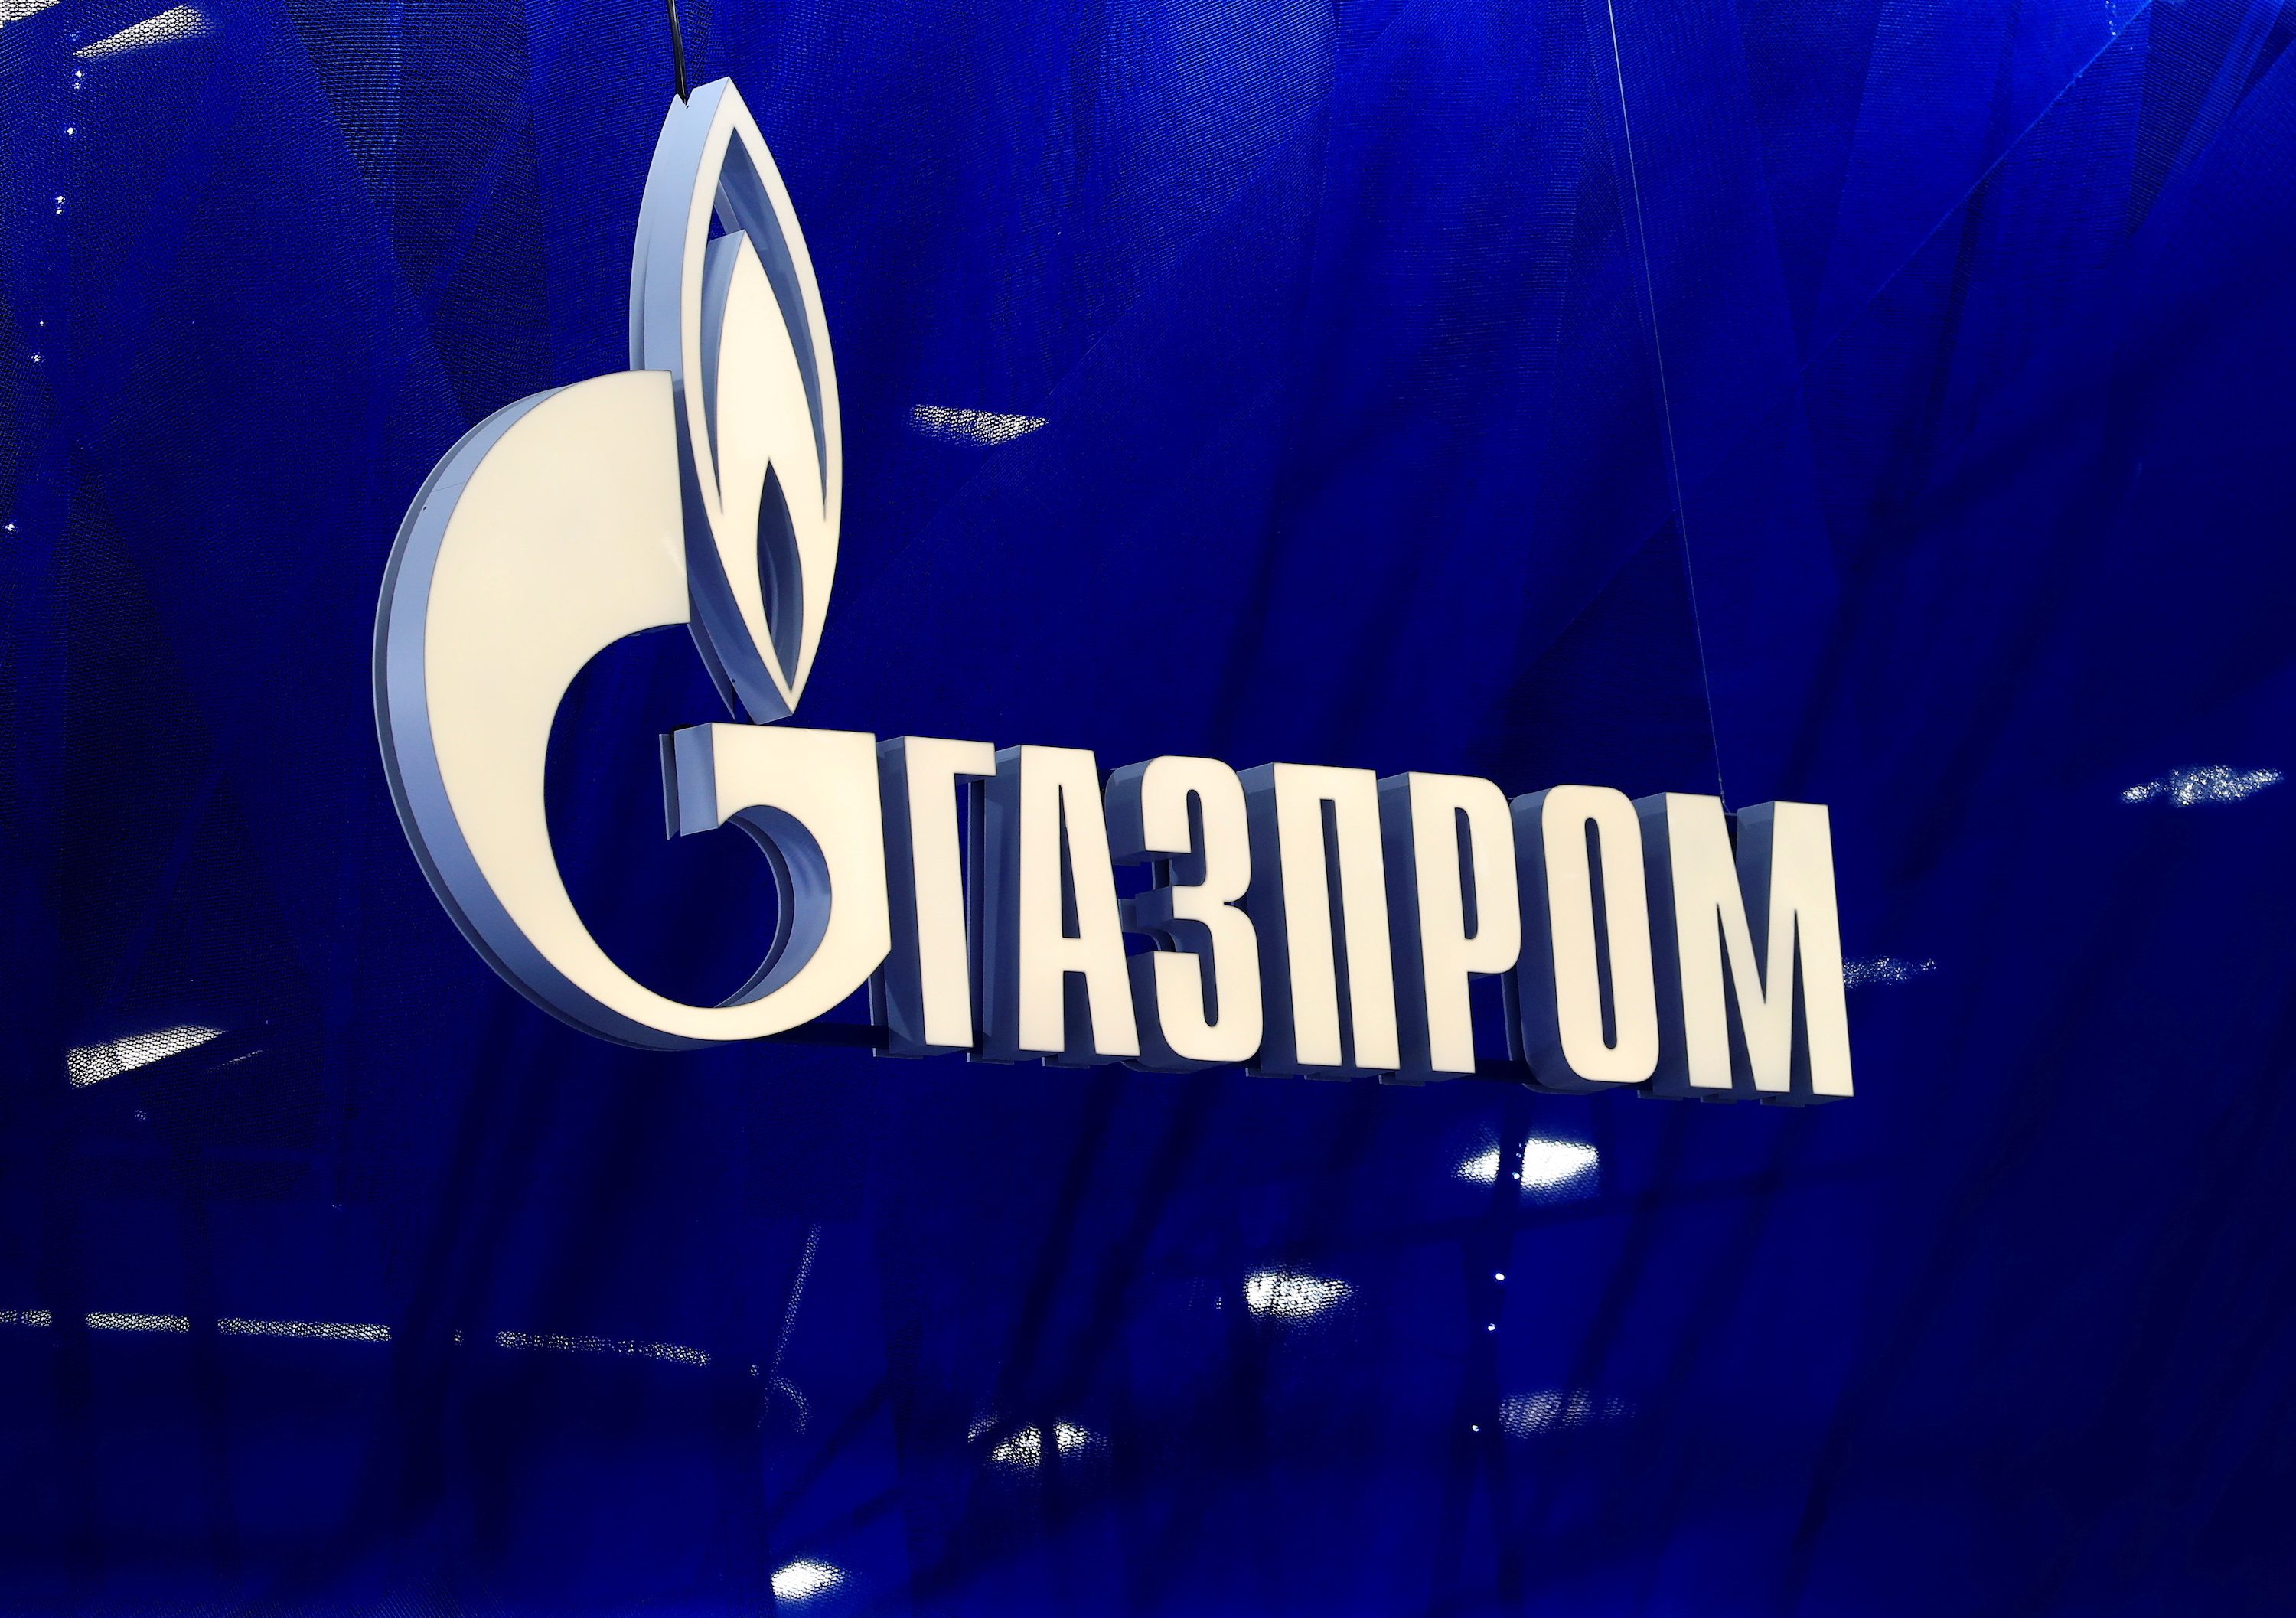 Russia’s Gazprom feels the heat over Europe’s red-hot gas prices